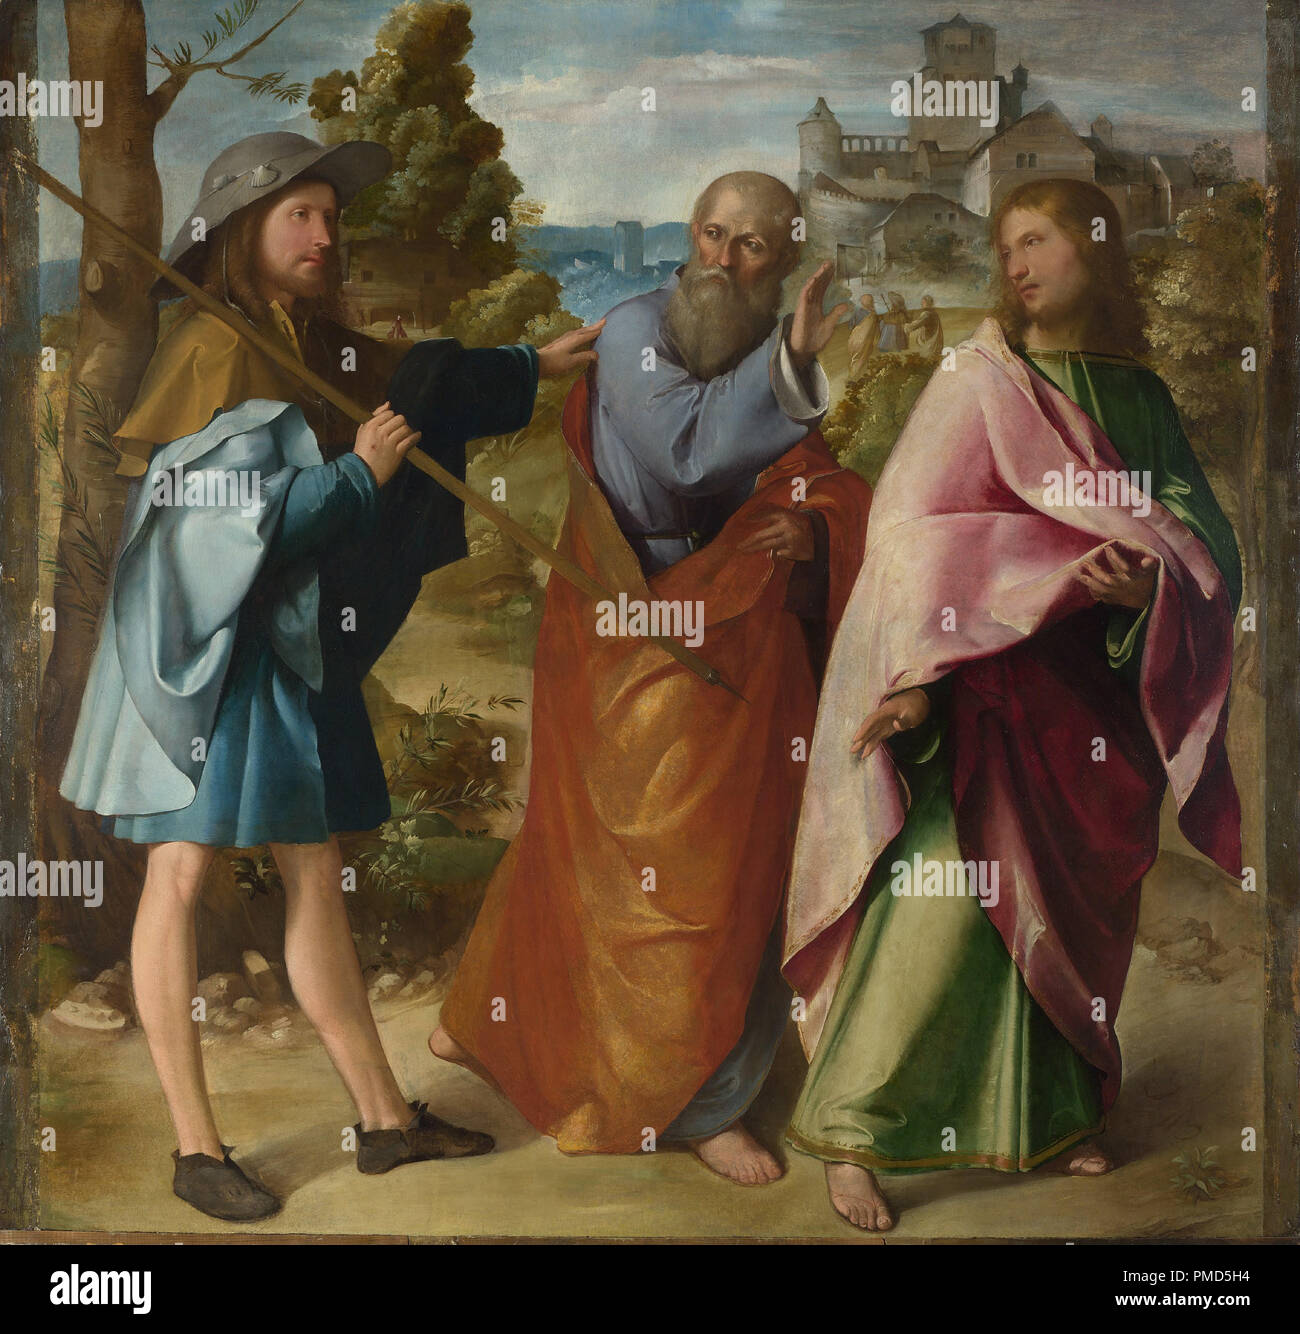 The Road to Emmaus. Date/Period: Between ca. 1516 and ca. 1517. Painting. Oil on panel. Height: 145.5 cm (57.2 in); Width: 144.2 cm (56.7 in). Author: ALTOBELLO MELONE. MELONE ALTOBELLO. Stock Photo